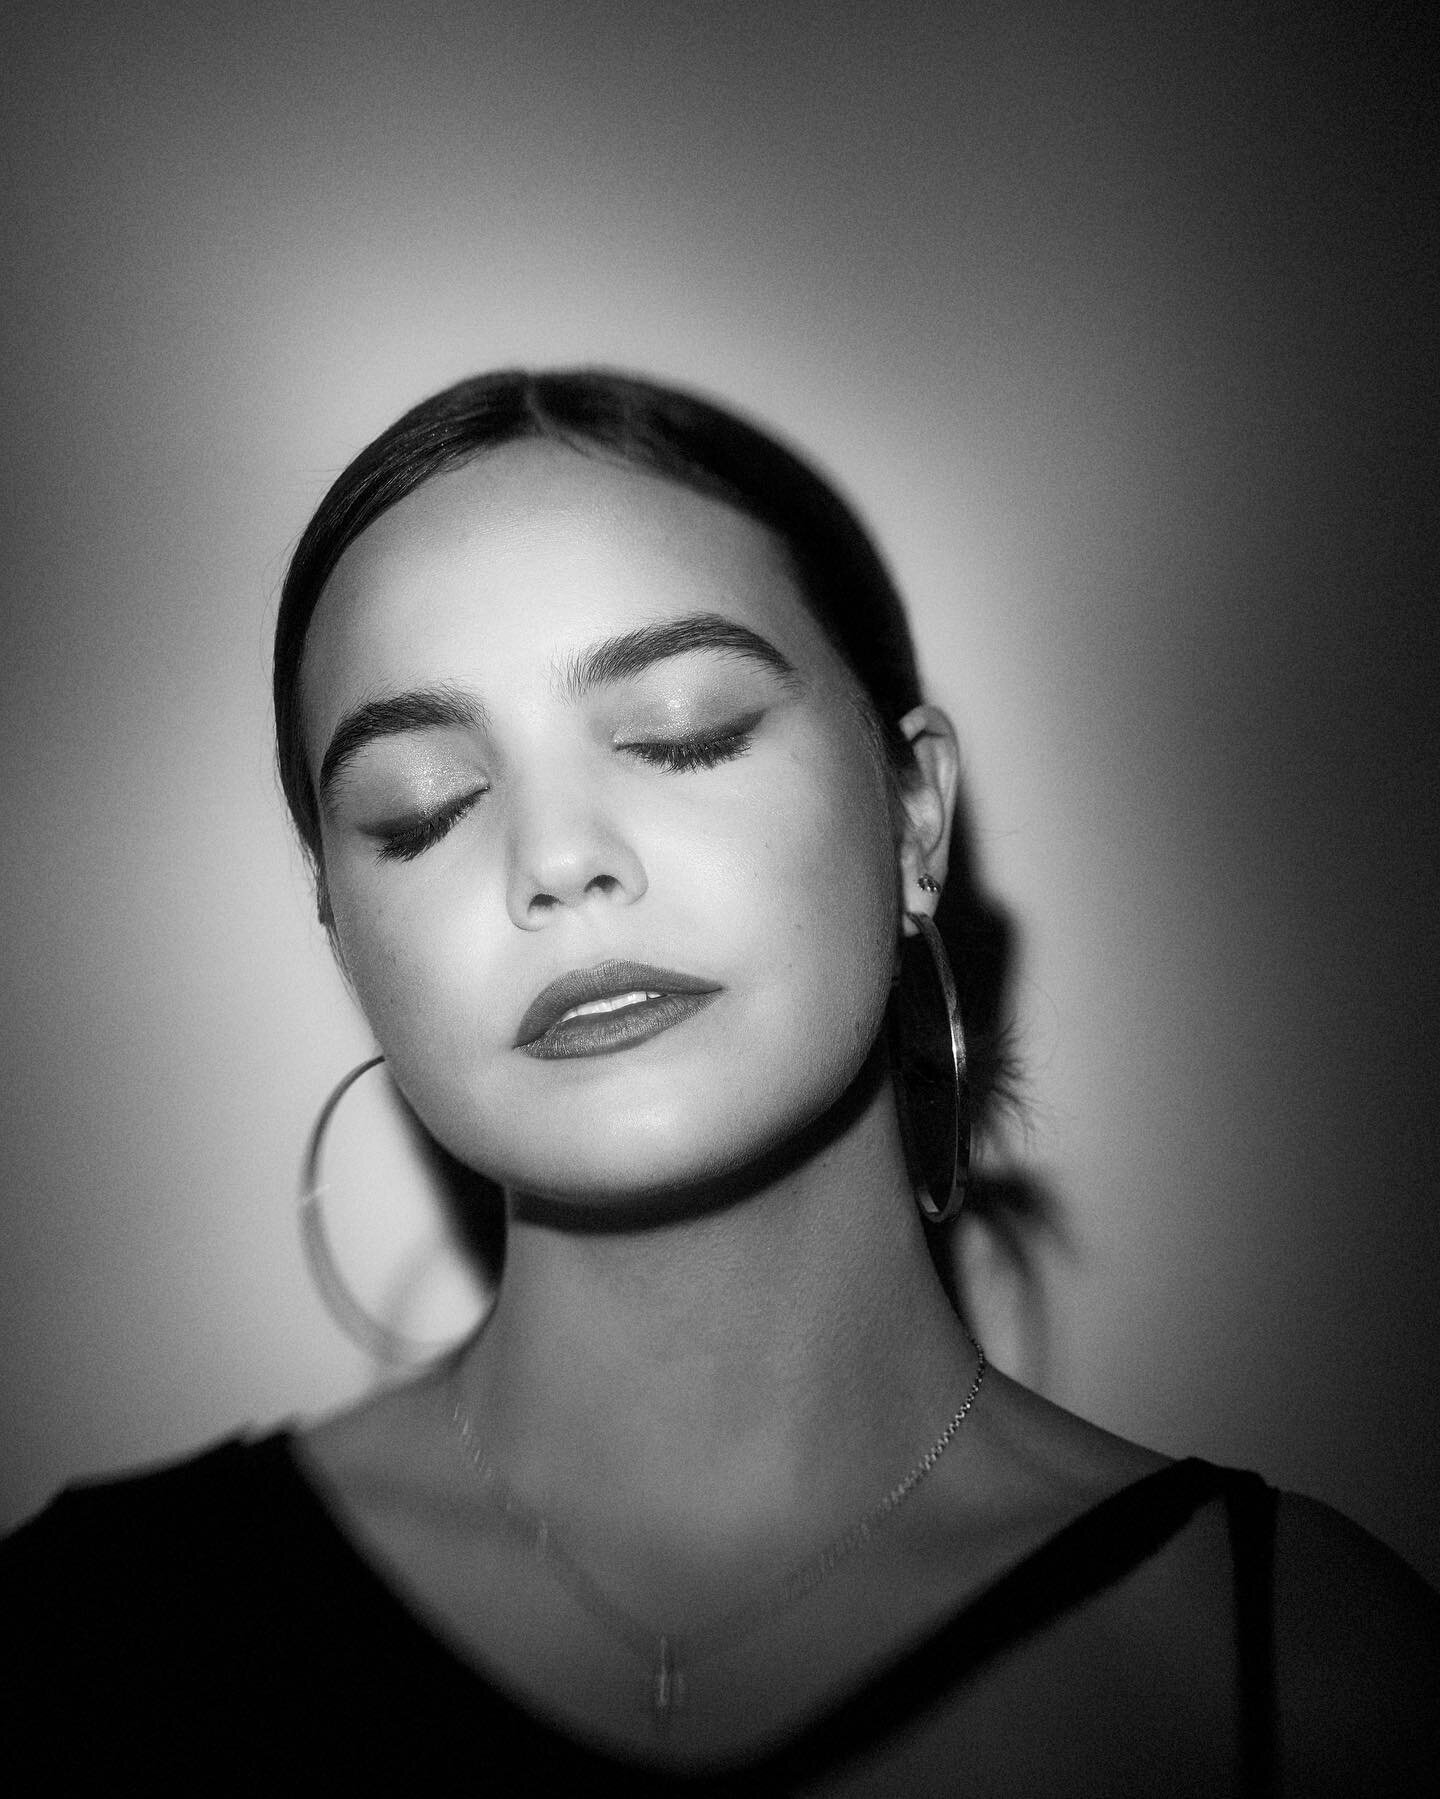 Had some fun with @baileemadison after #driftcreativesessions with @meganlanoux I always love working with these amazing women! #baileemadison